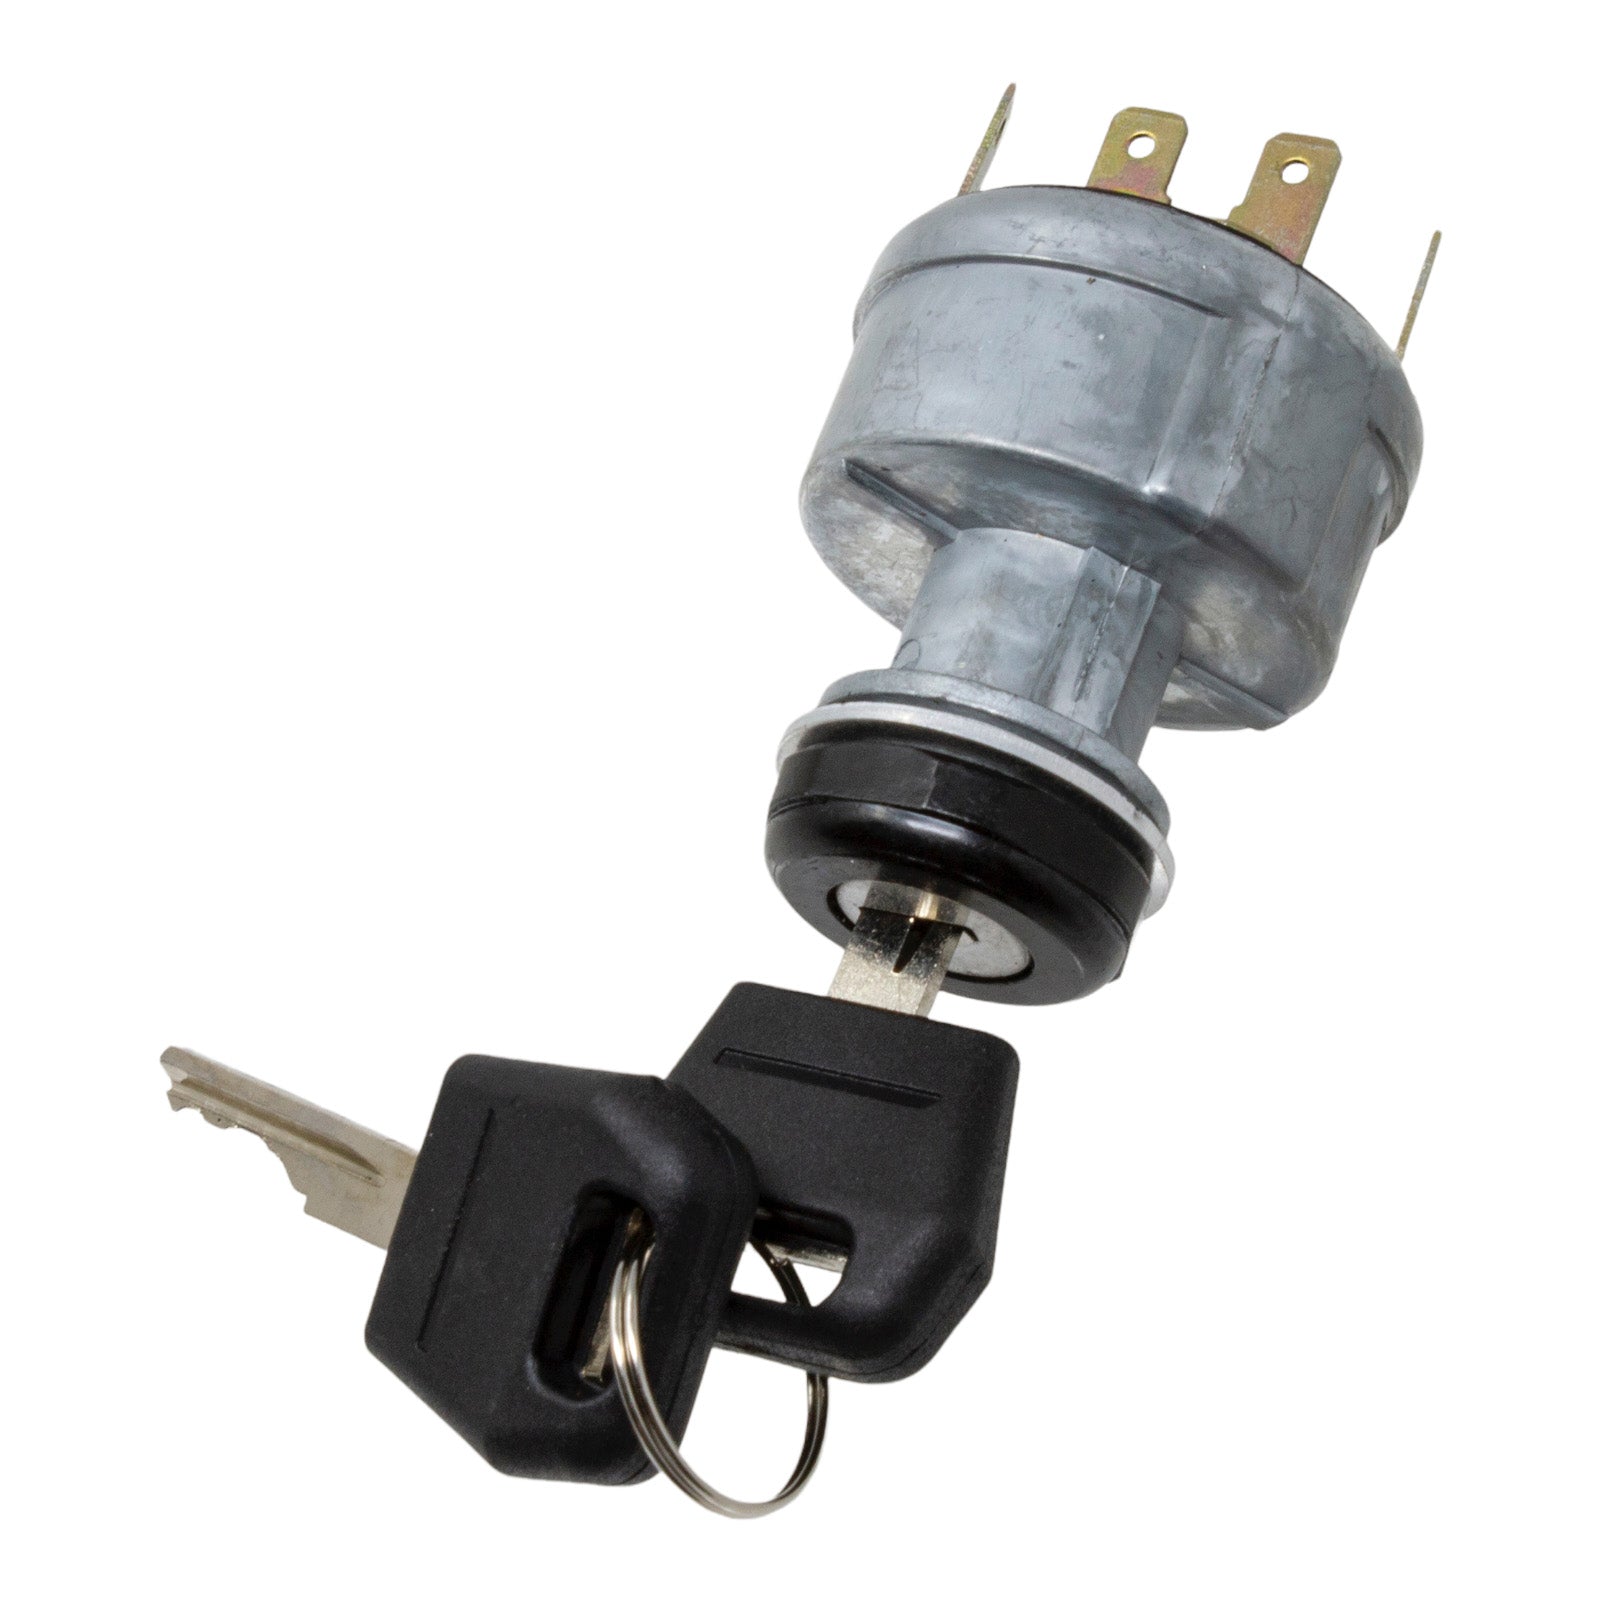 Duraforce A134737, Ignition Switch For Case IH